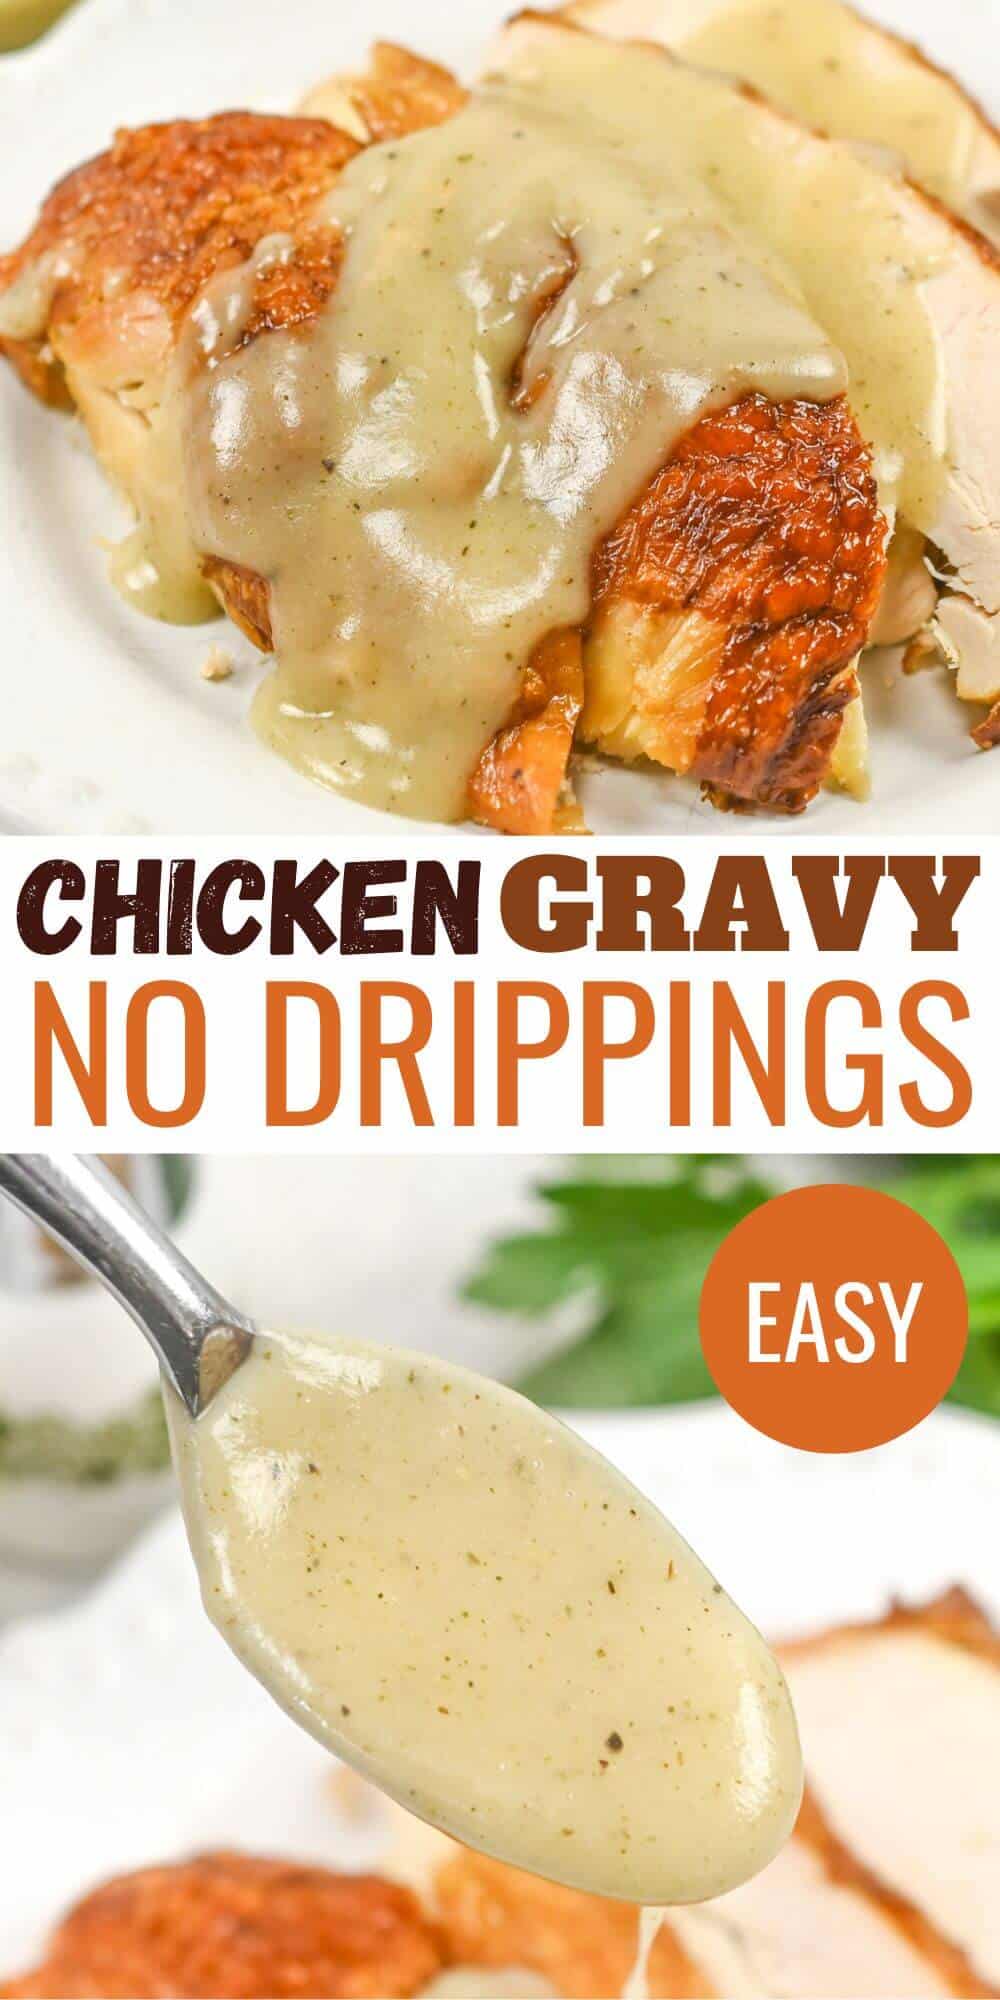 Chicken gravy with no drippings.